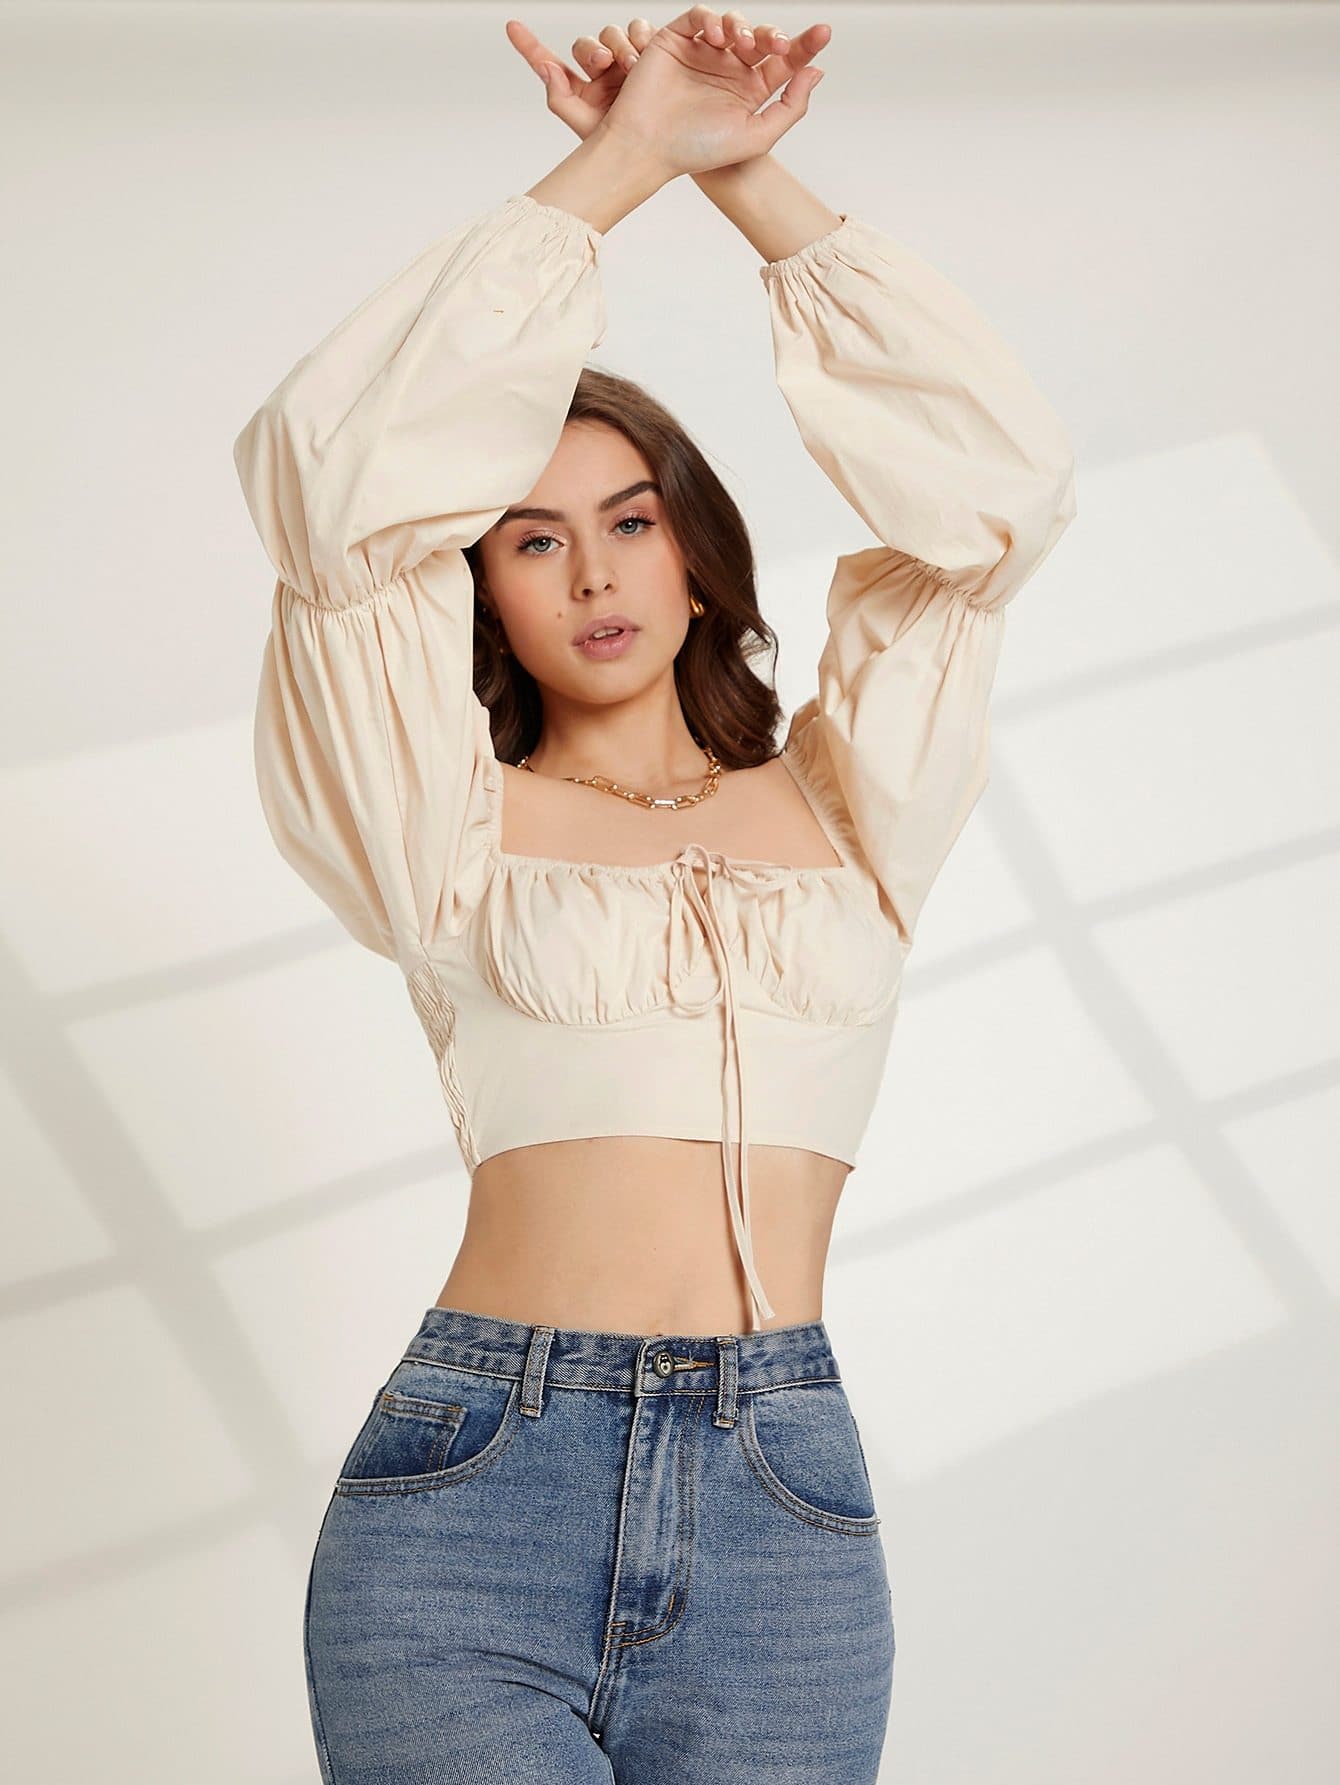 Square Neck Solid Ruched Knot Front Lantern Sleeve Crop Top